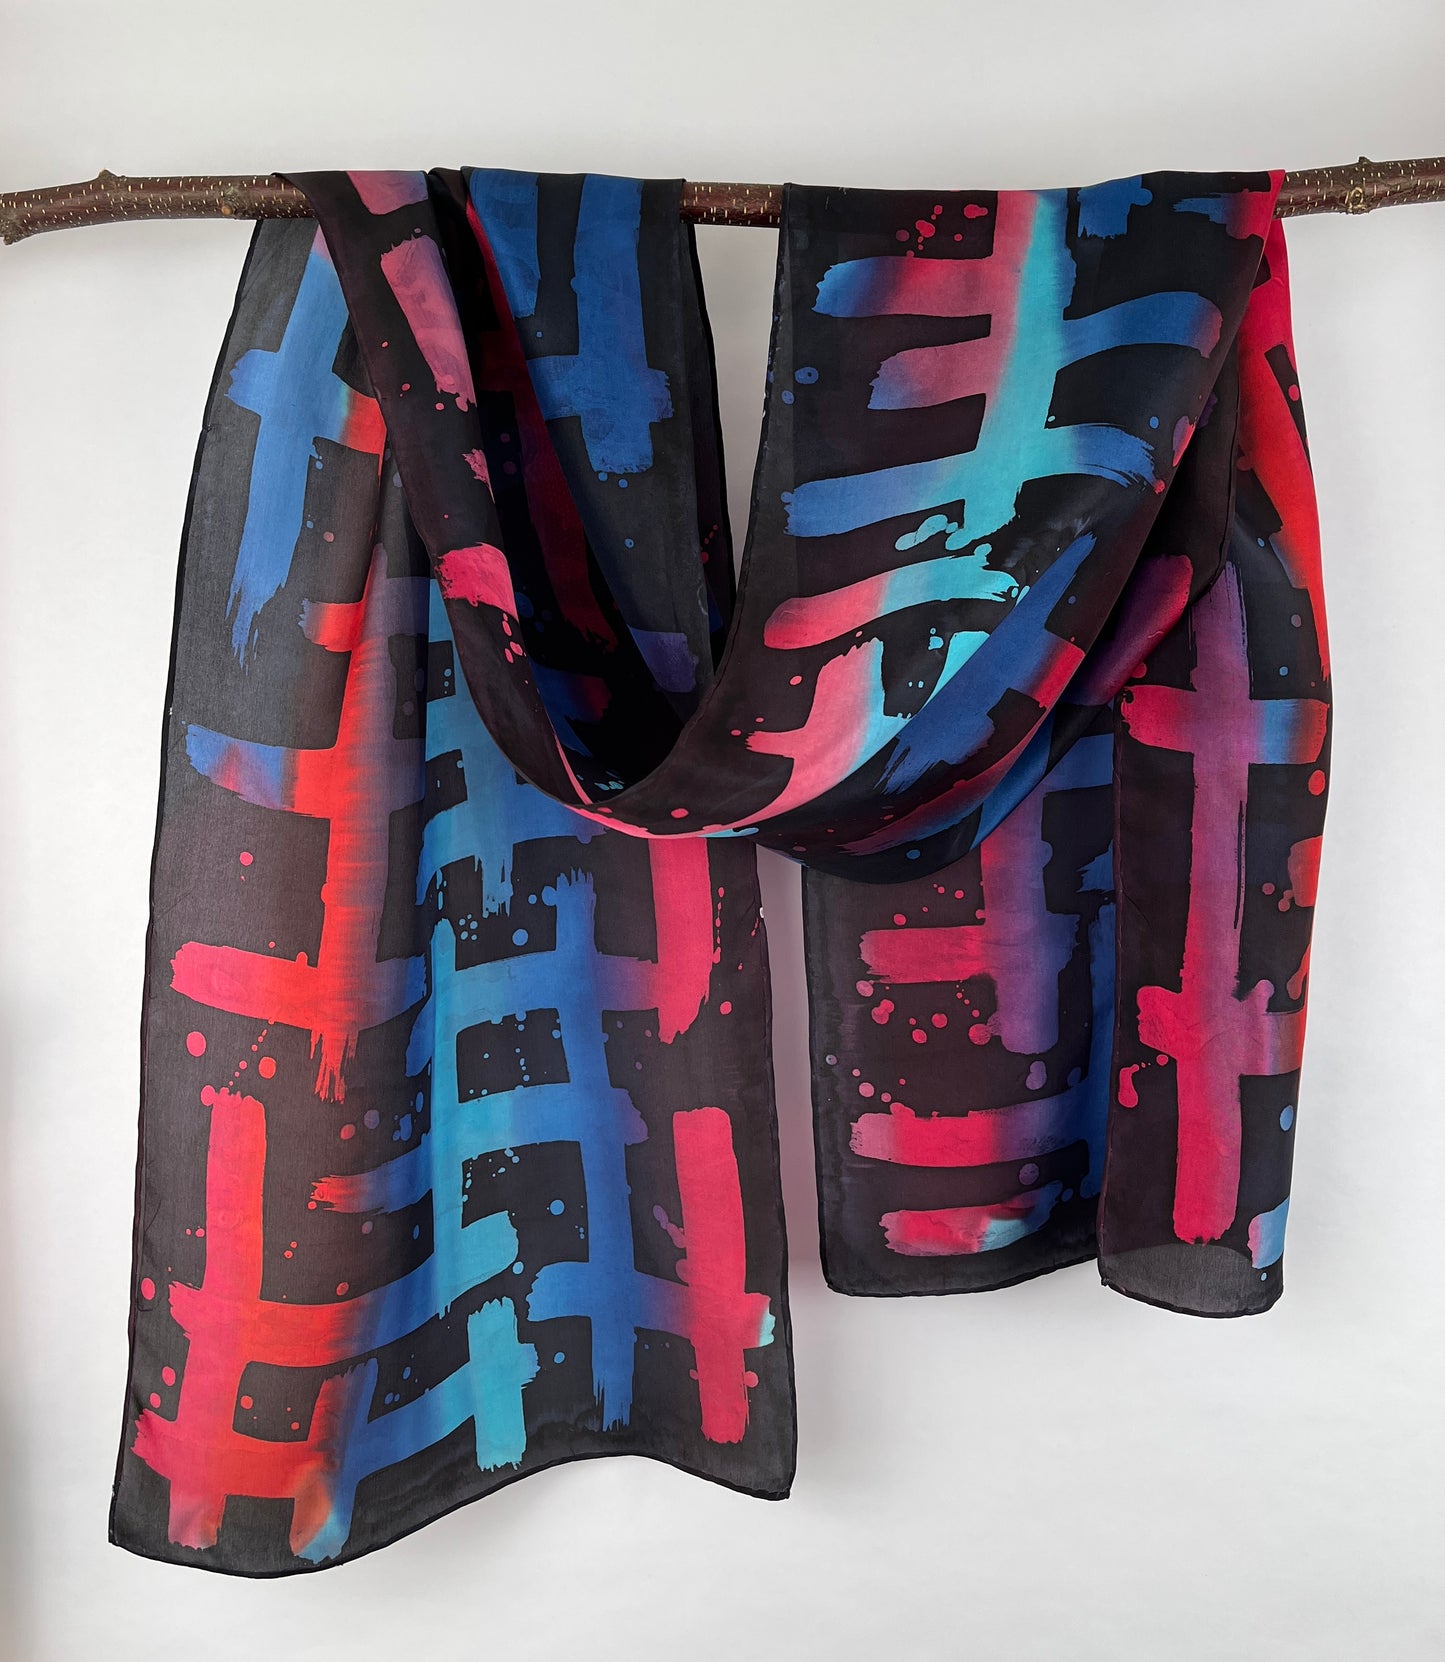 “Fire & Ice” - Hand-dyed Silk Scarf - $120